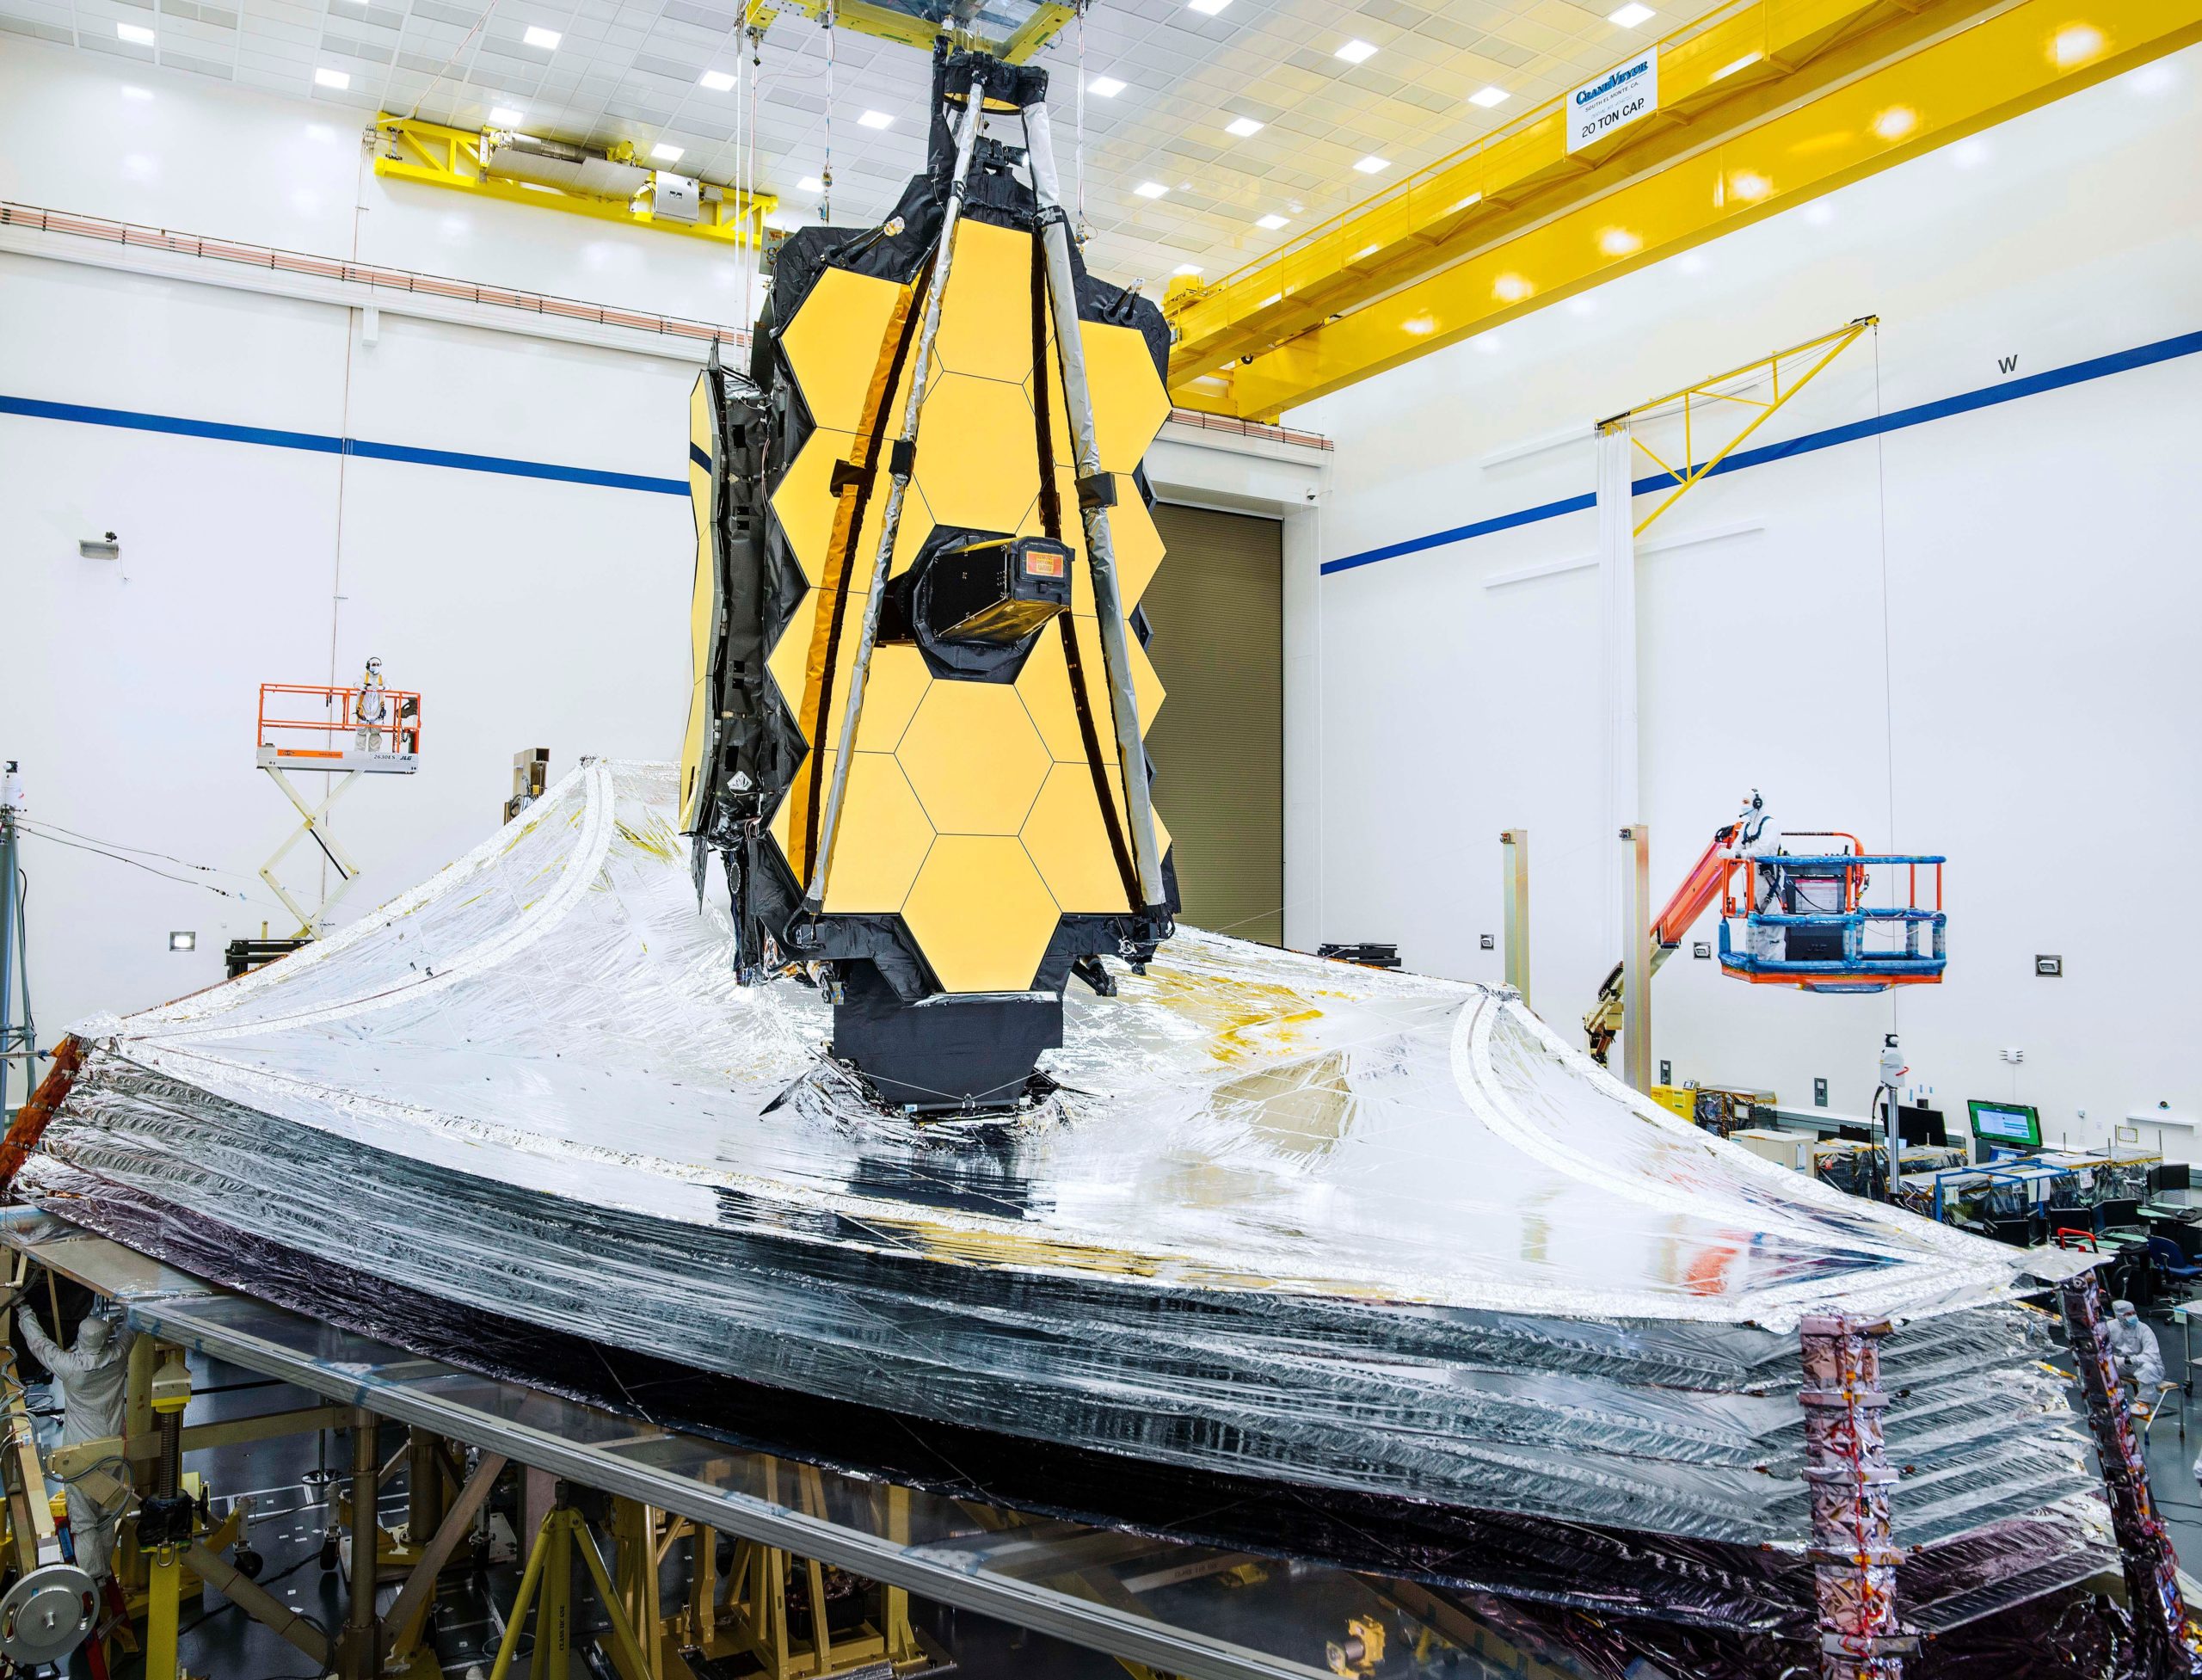 James Webb Space Telescope and sunshield during packing on Earth